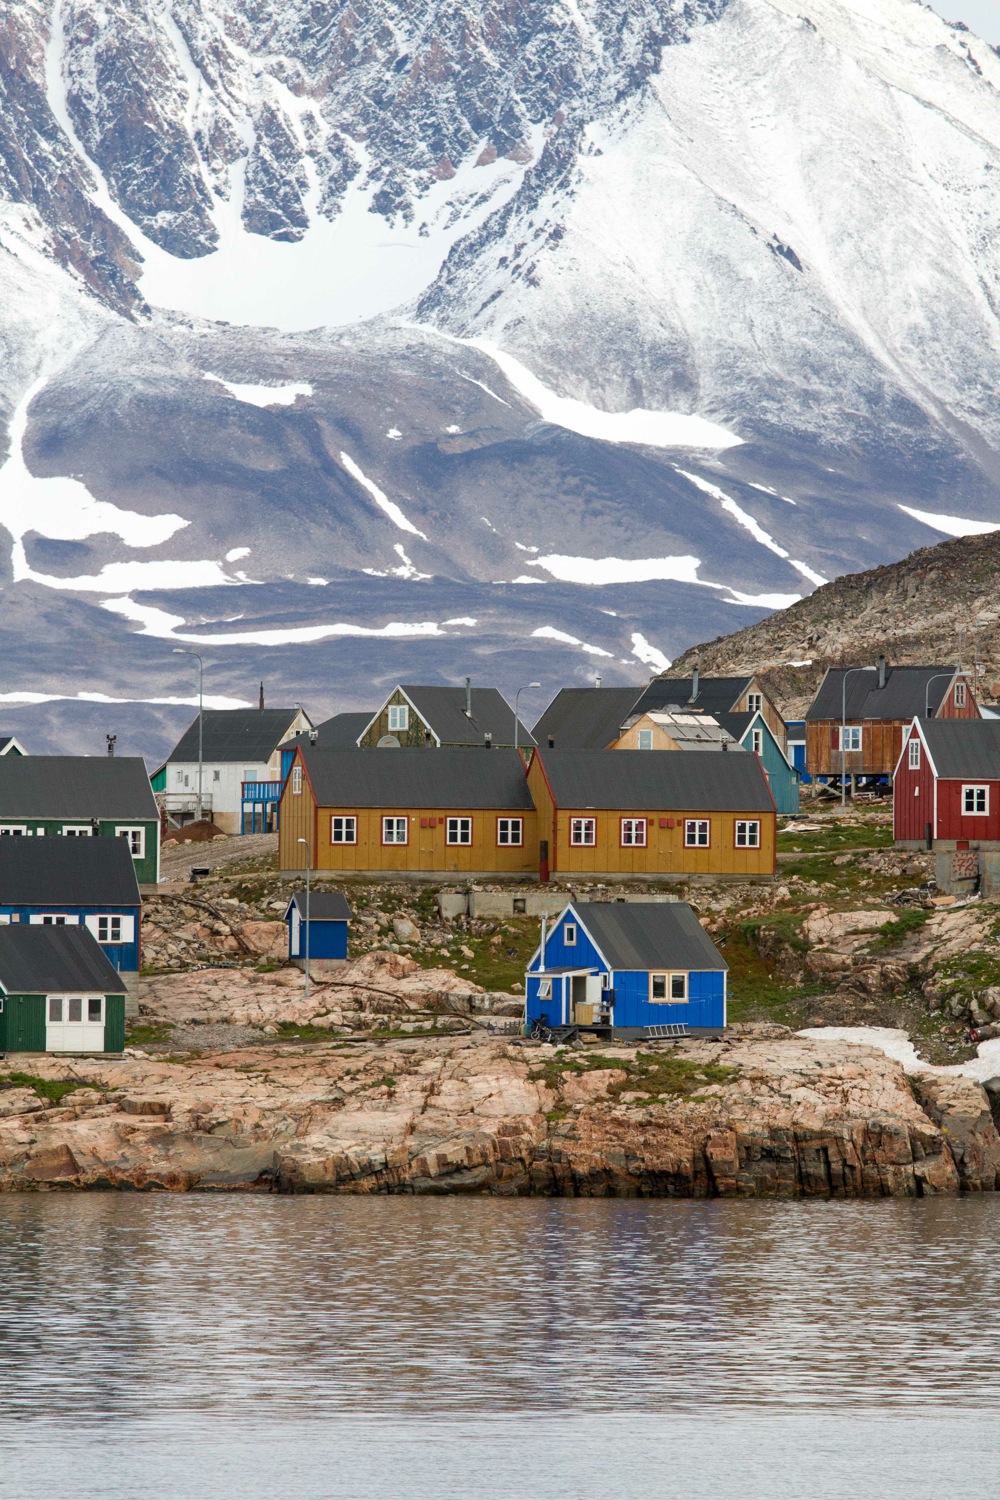 The charming Greenland village of Ittoqqortoormiit, where locals thrive even in punishing Arctic conditions, after the storm. Photo: Daven Hafey